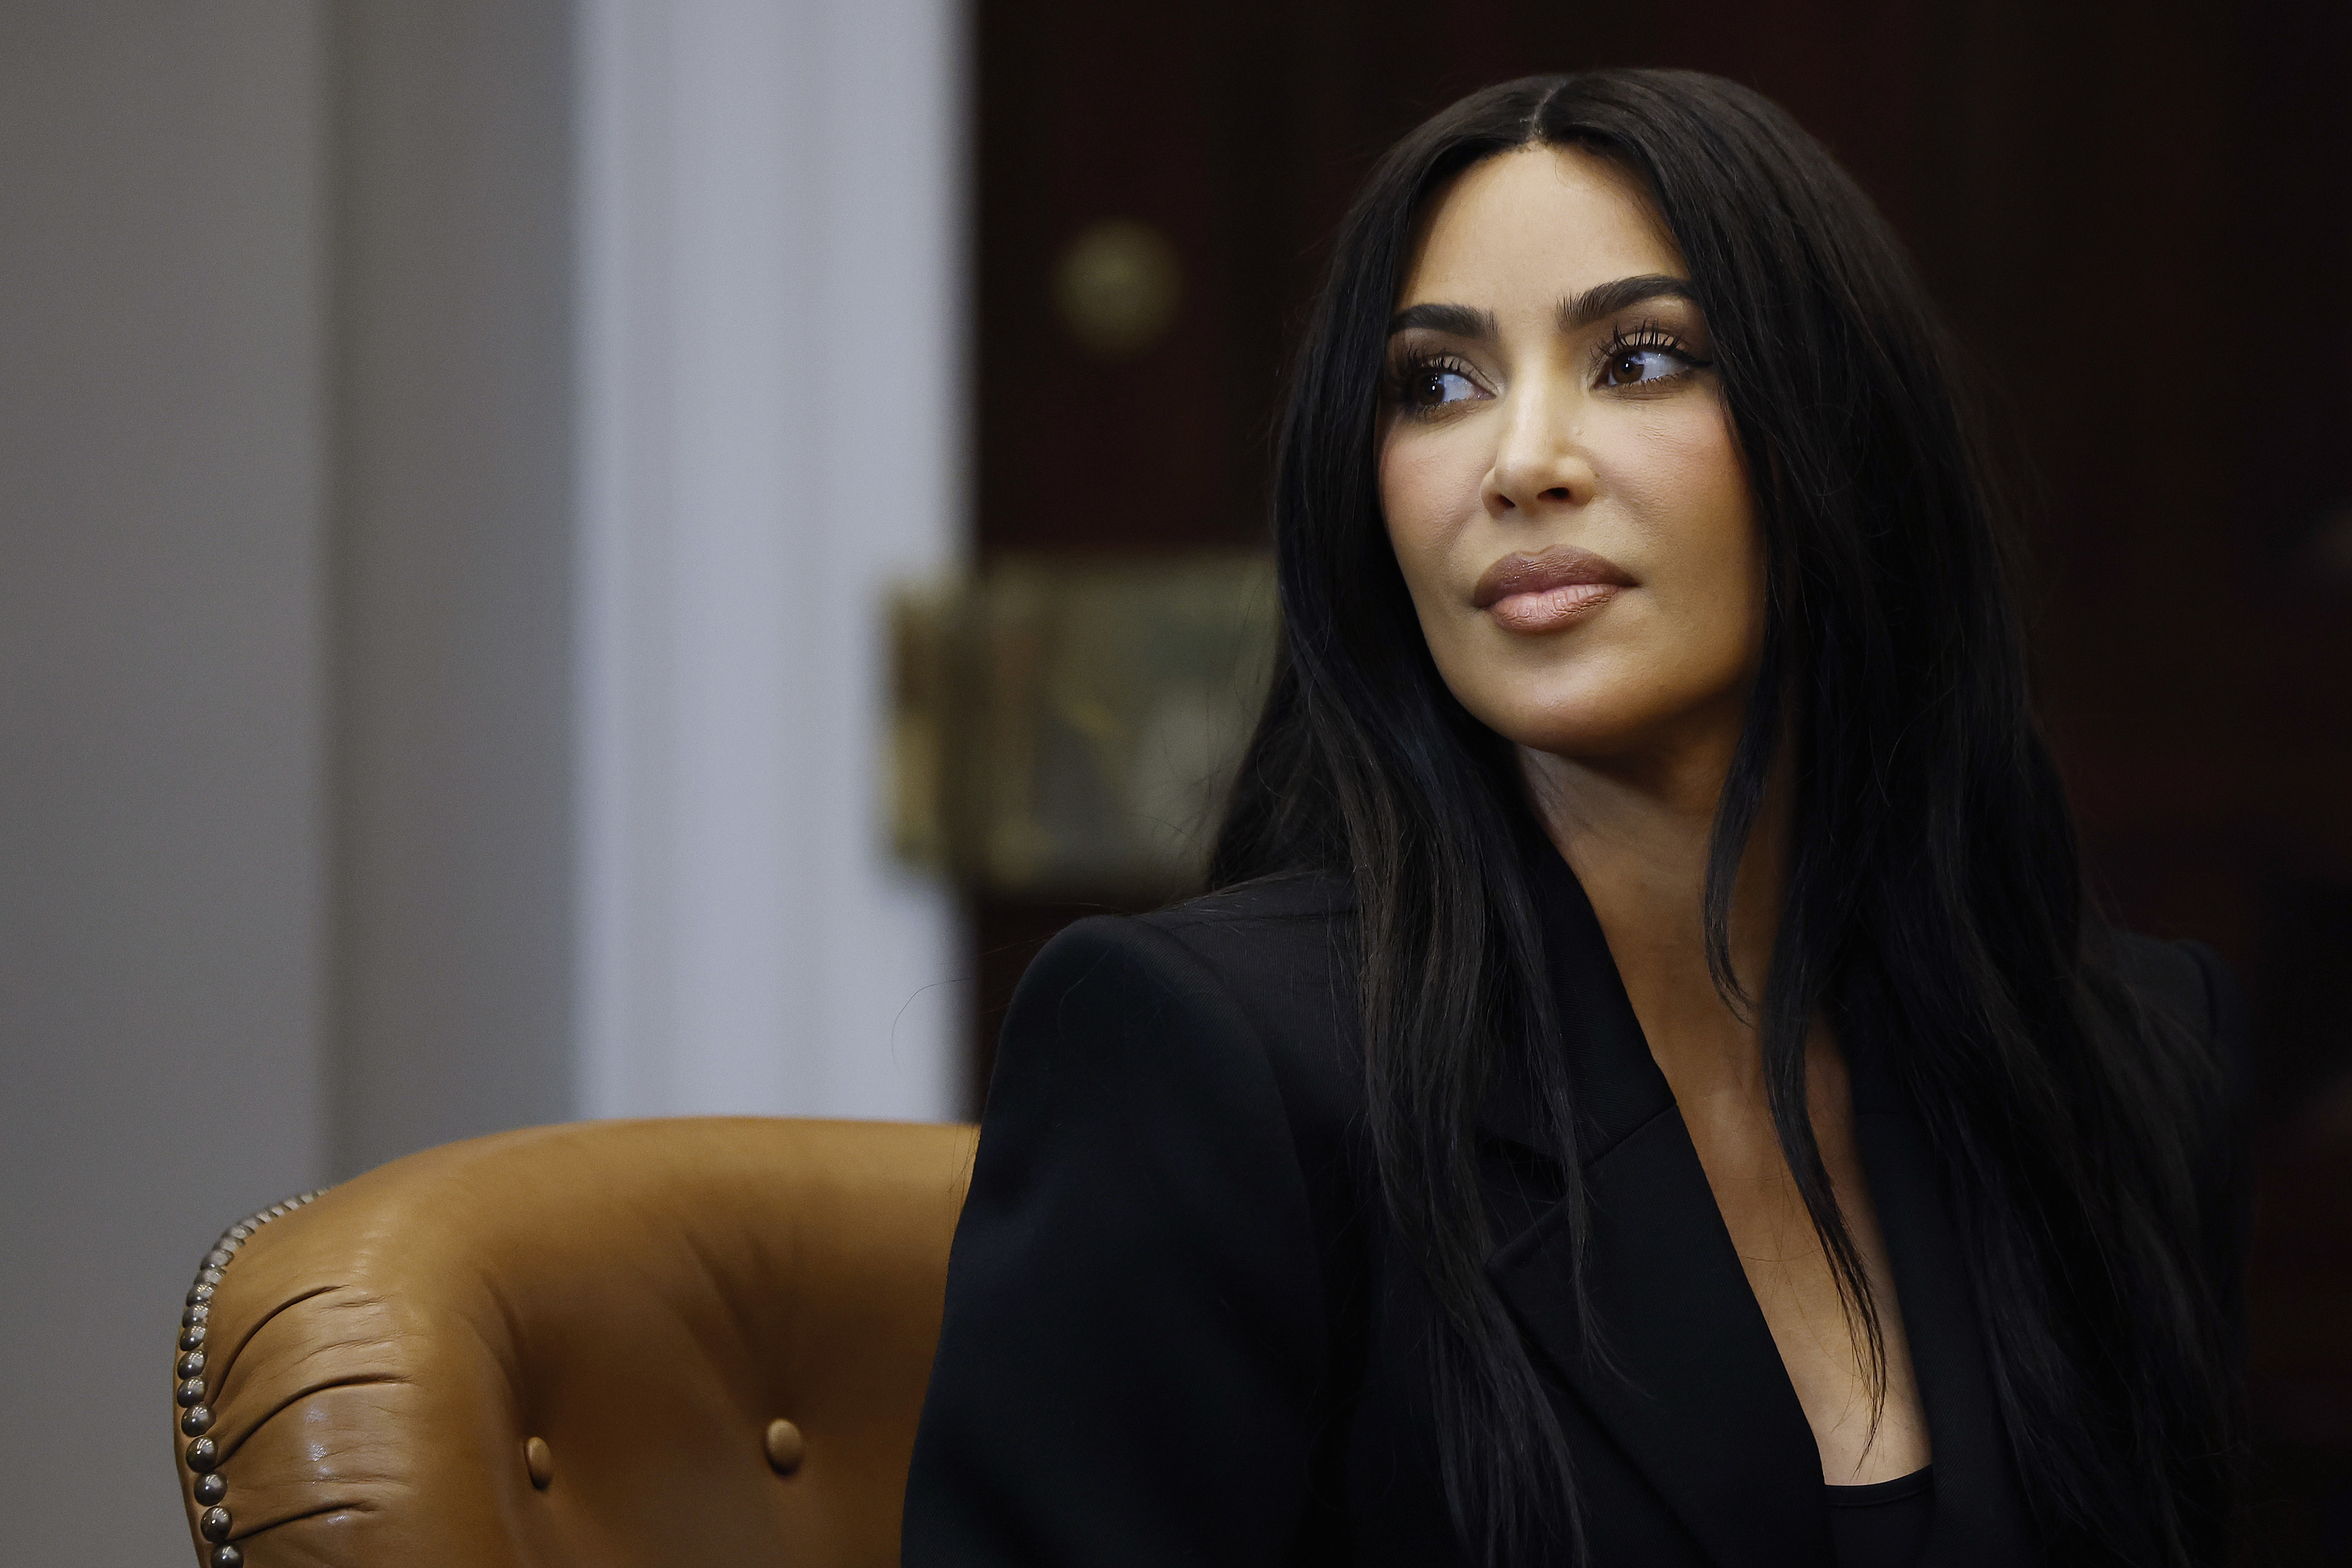 Kim Kardashian in a black blazer, seated, looking to the side with a focused expression